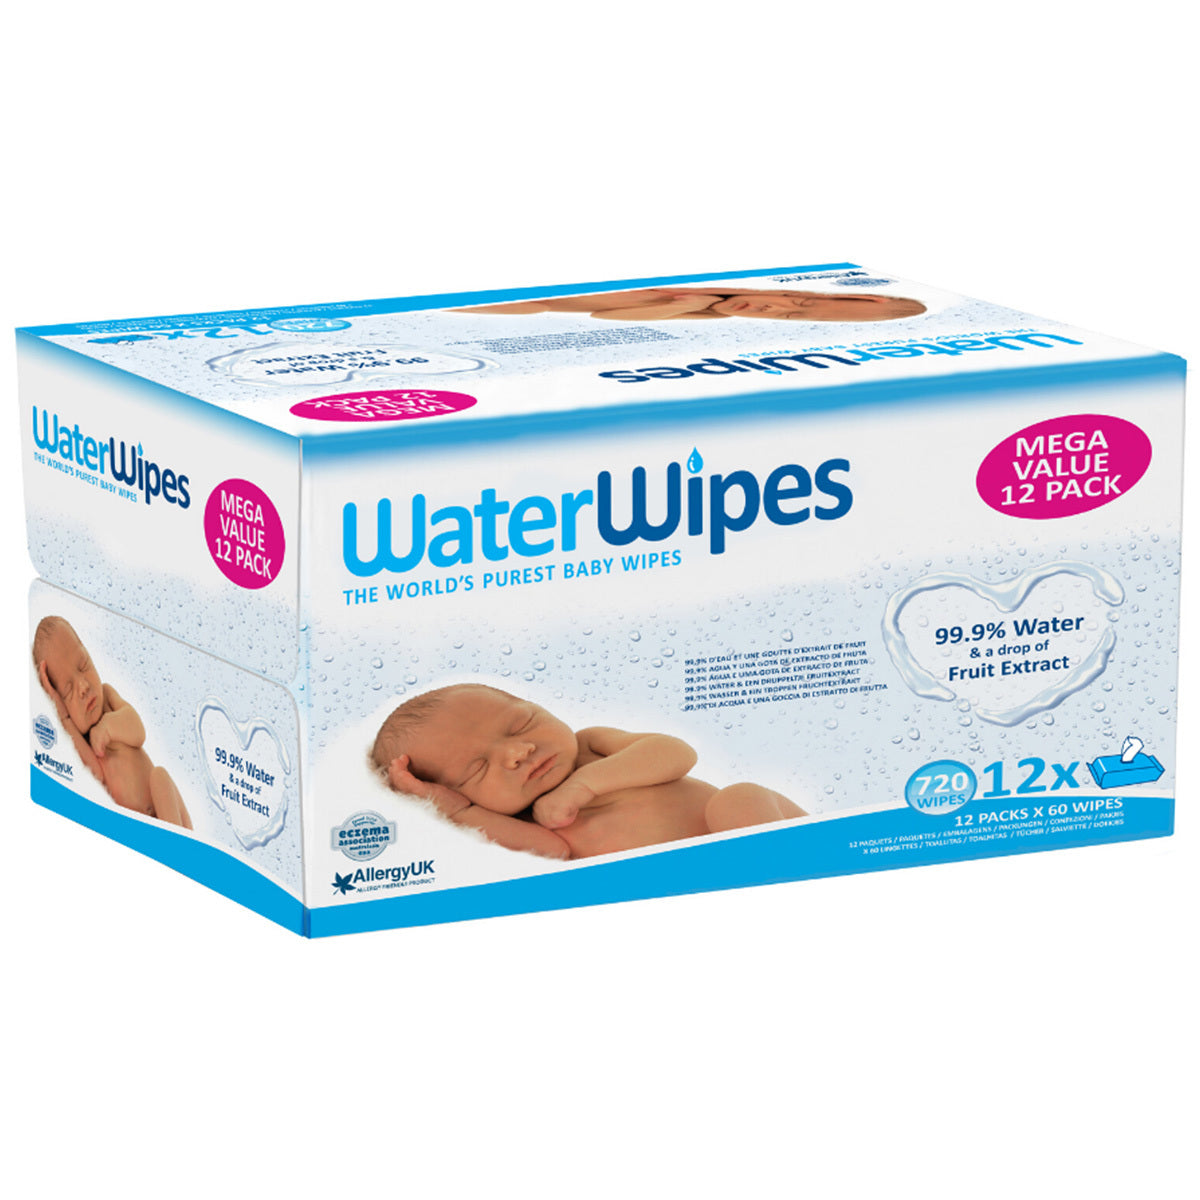 WaterWipes Baby Wipes Original Big Size Value Pack - Medaid - Lebanon